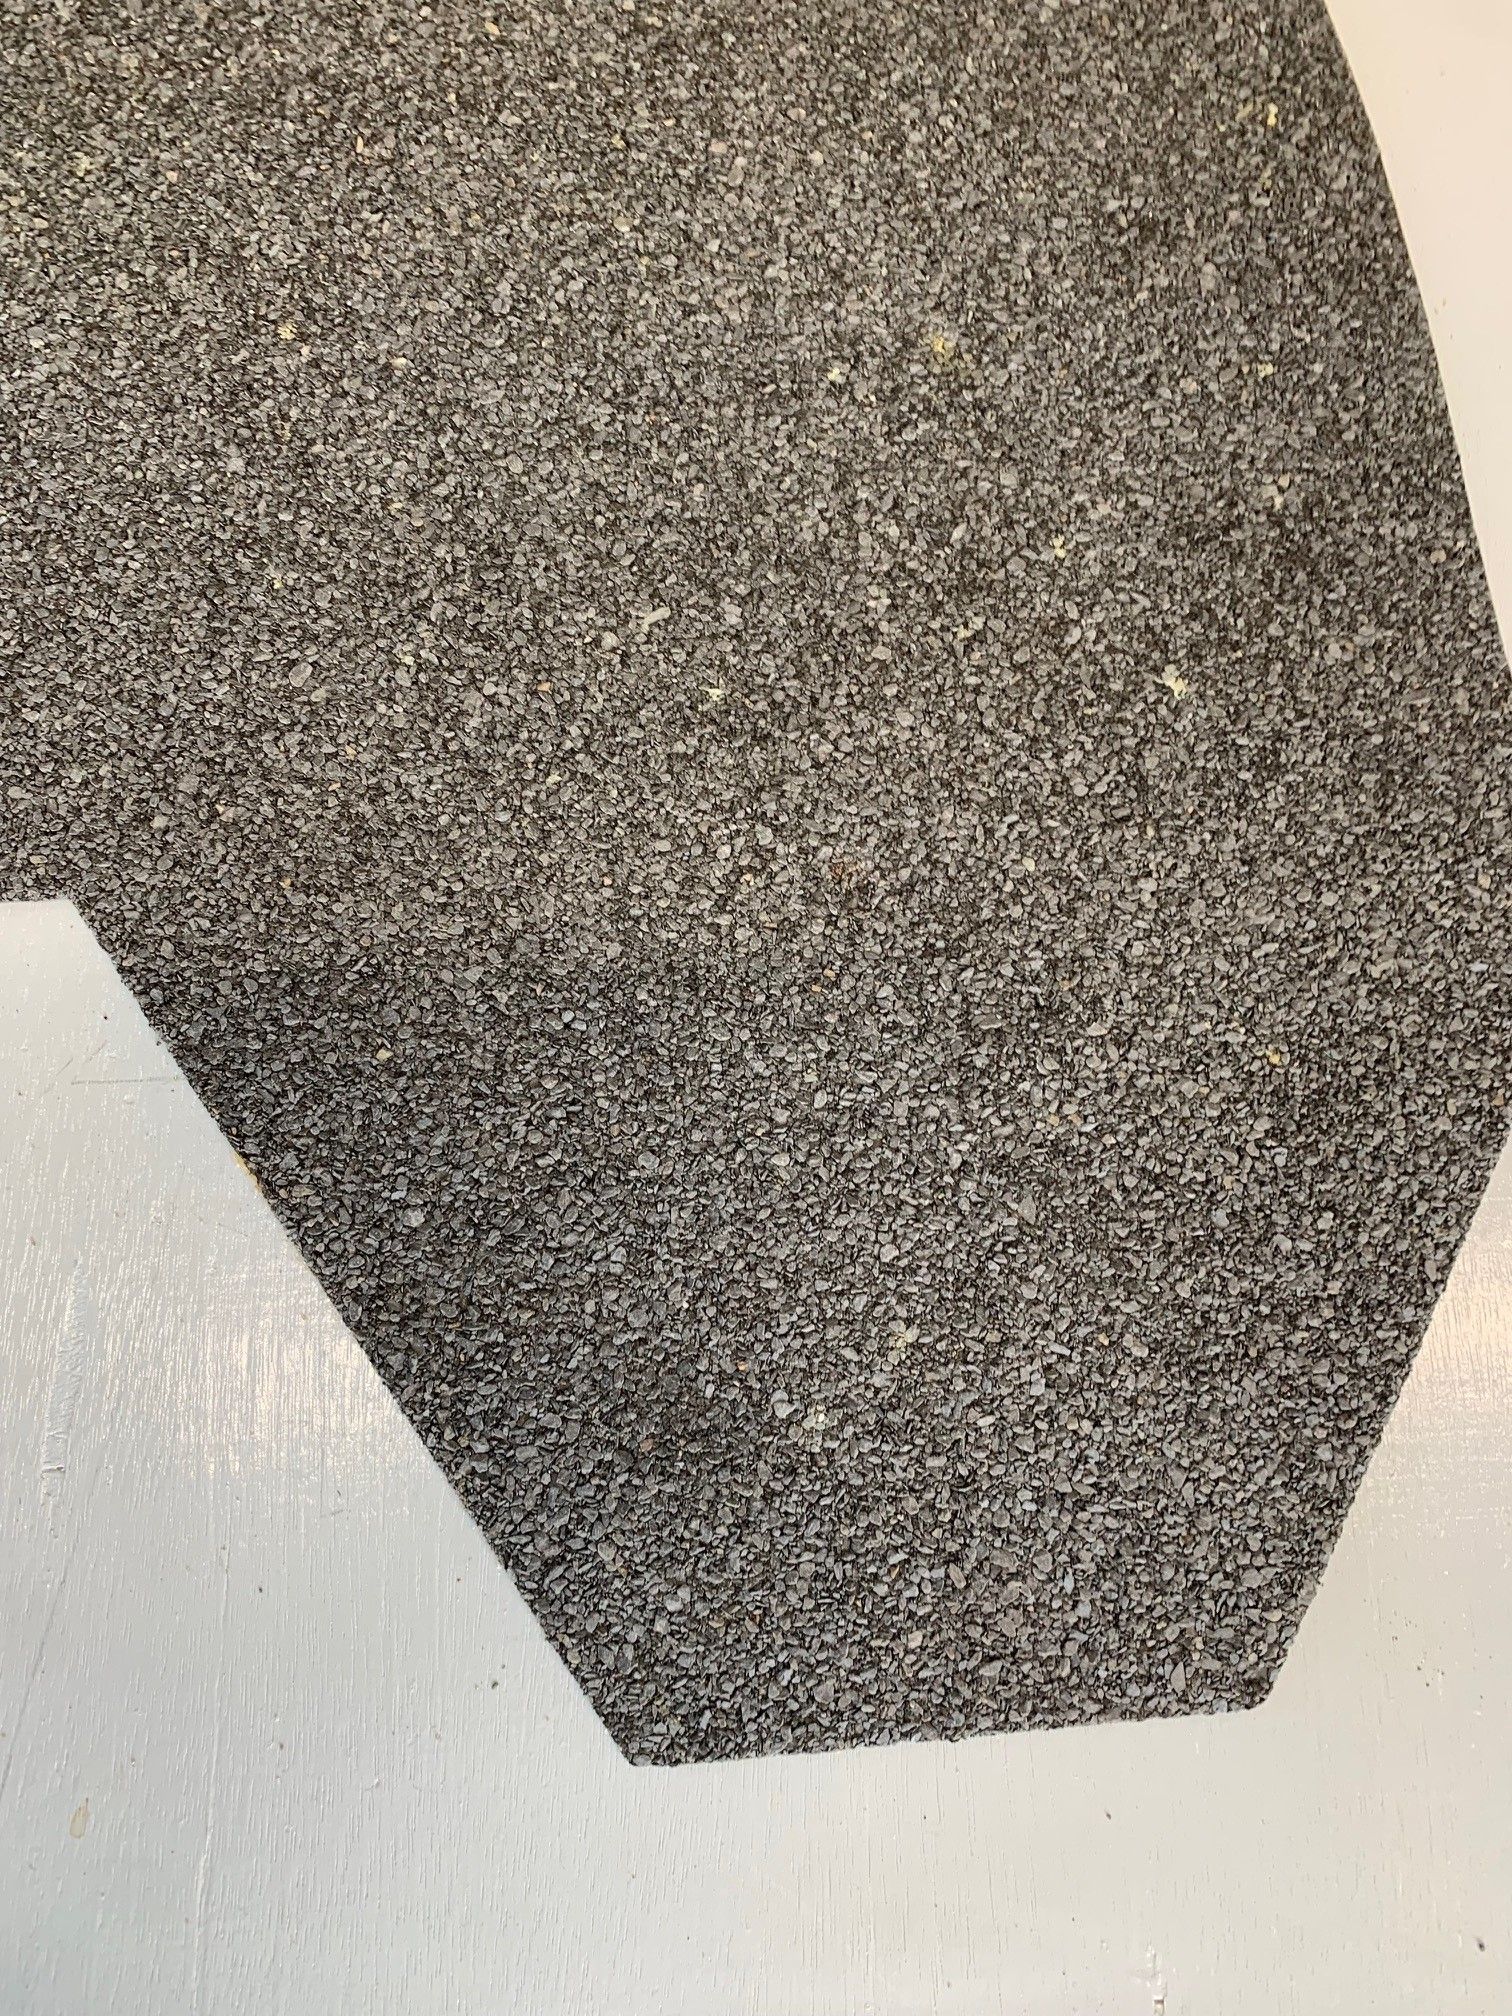 Grey shingles that go on our roofs as an option